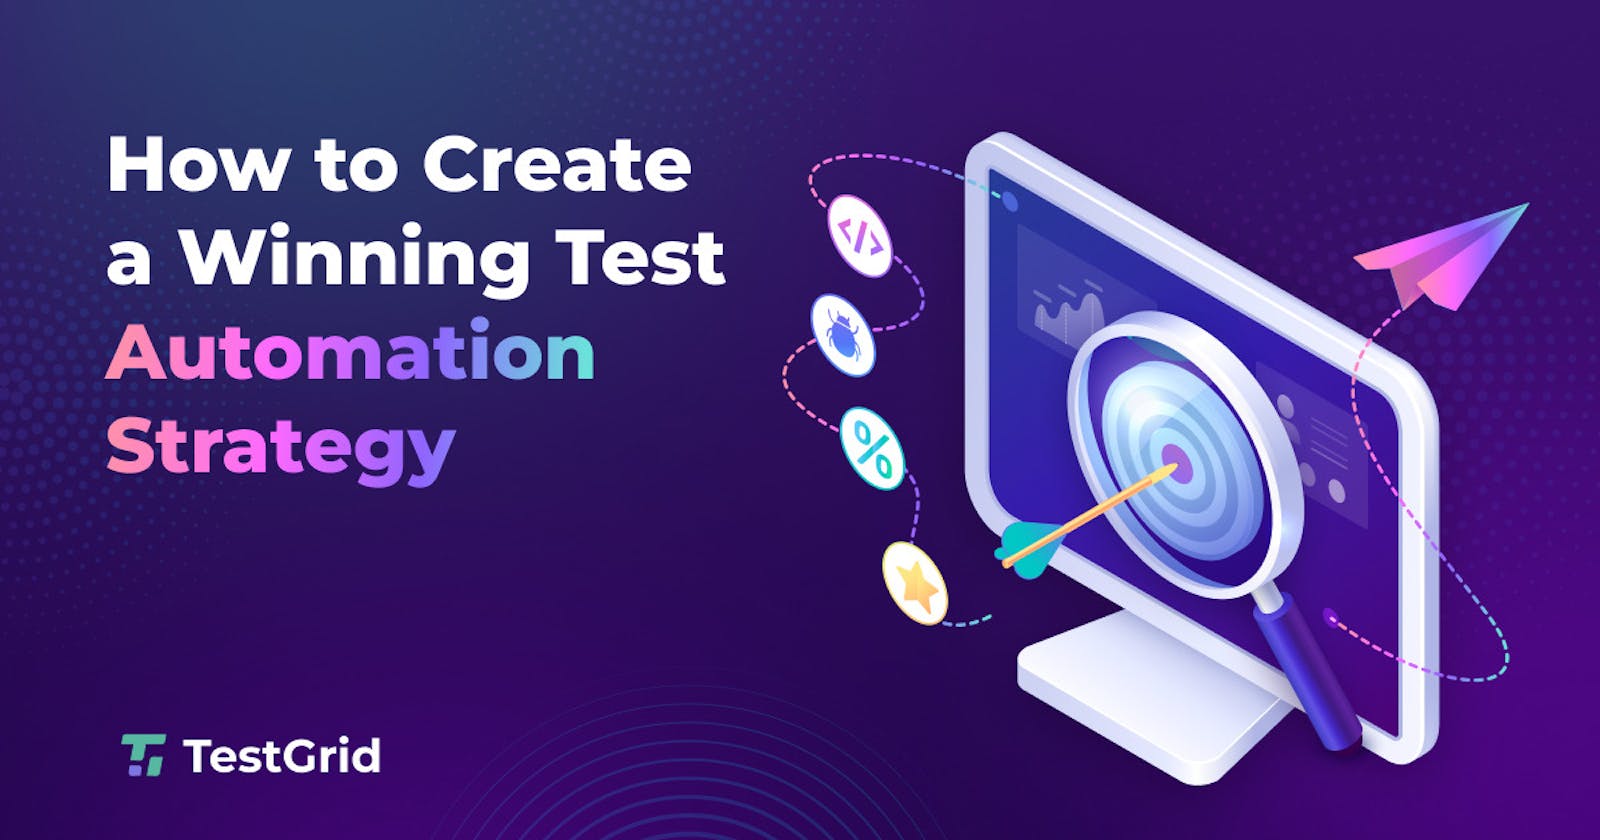 How to Create a Winning Test Automation Strategy